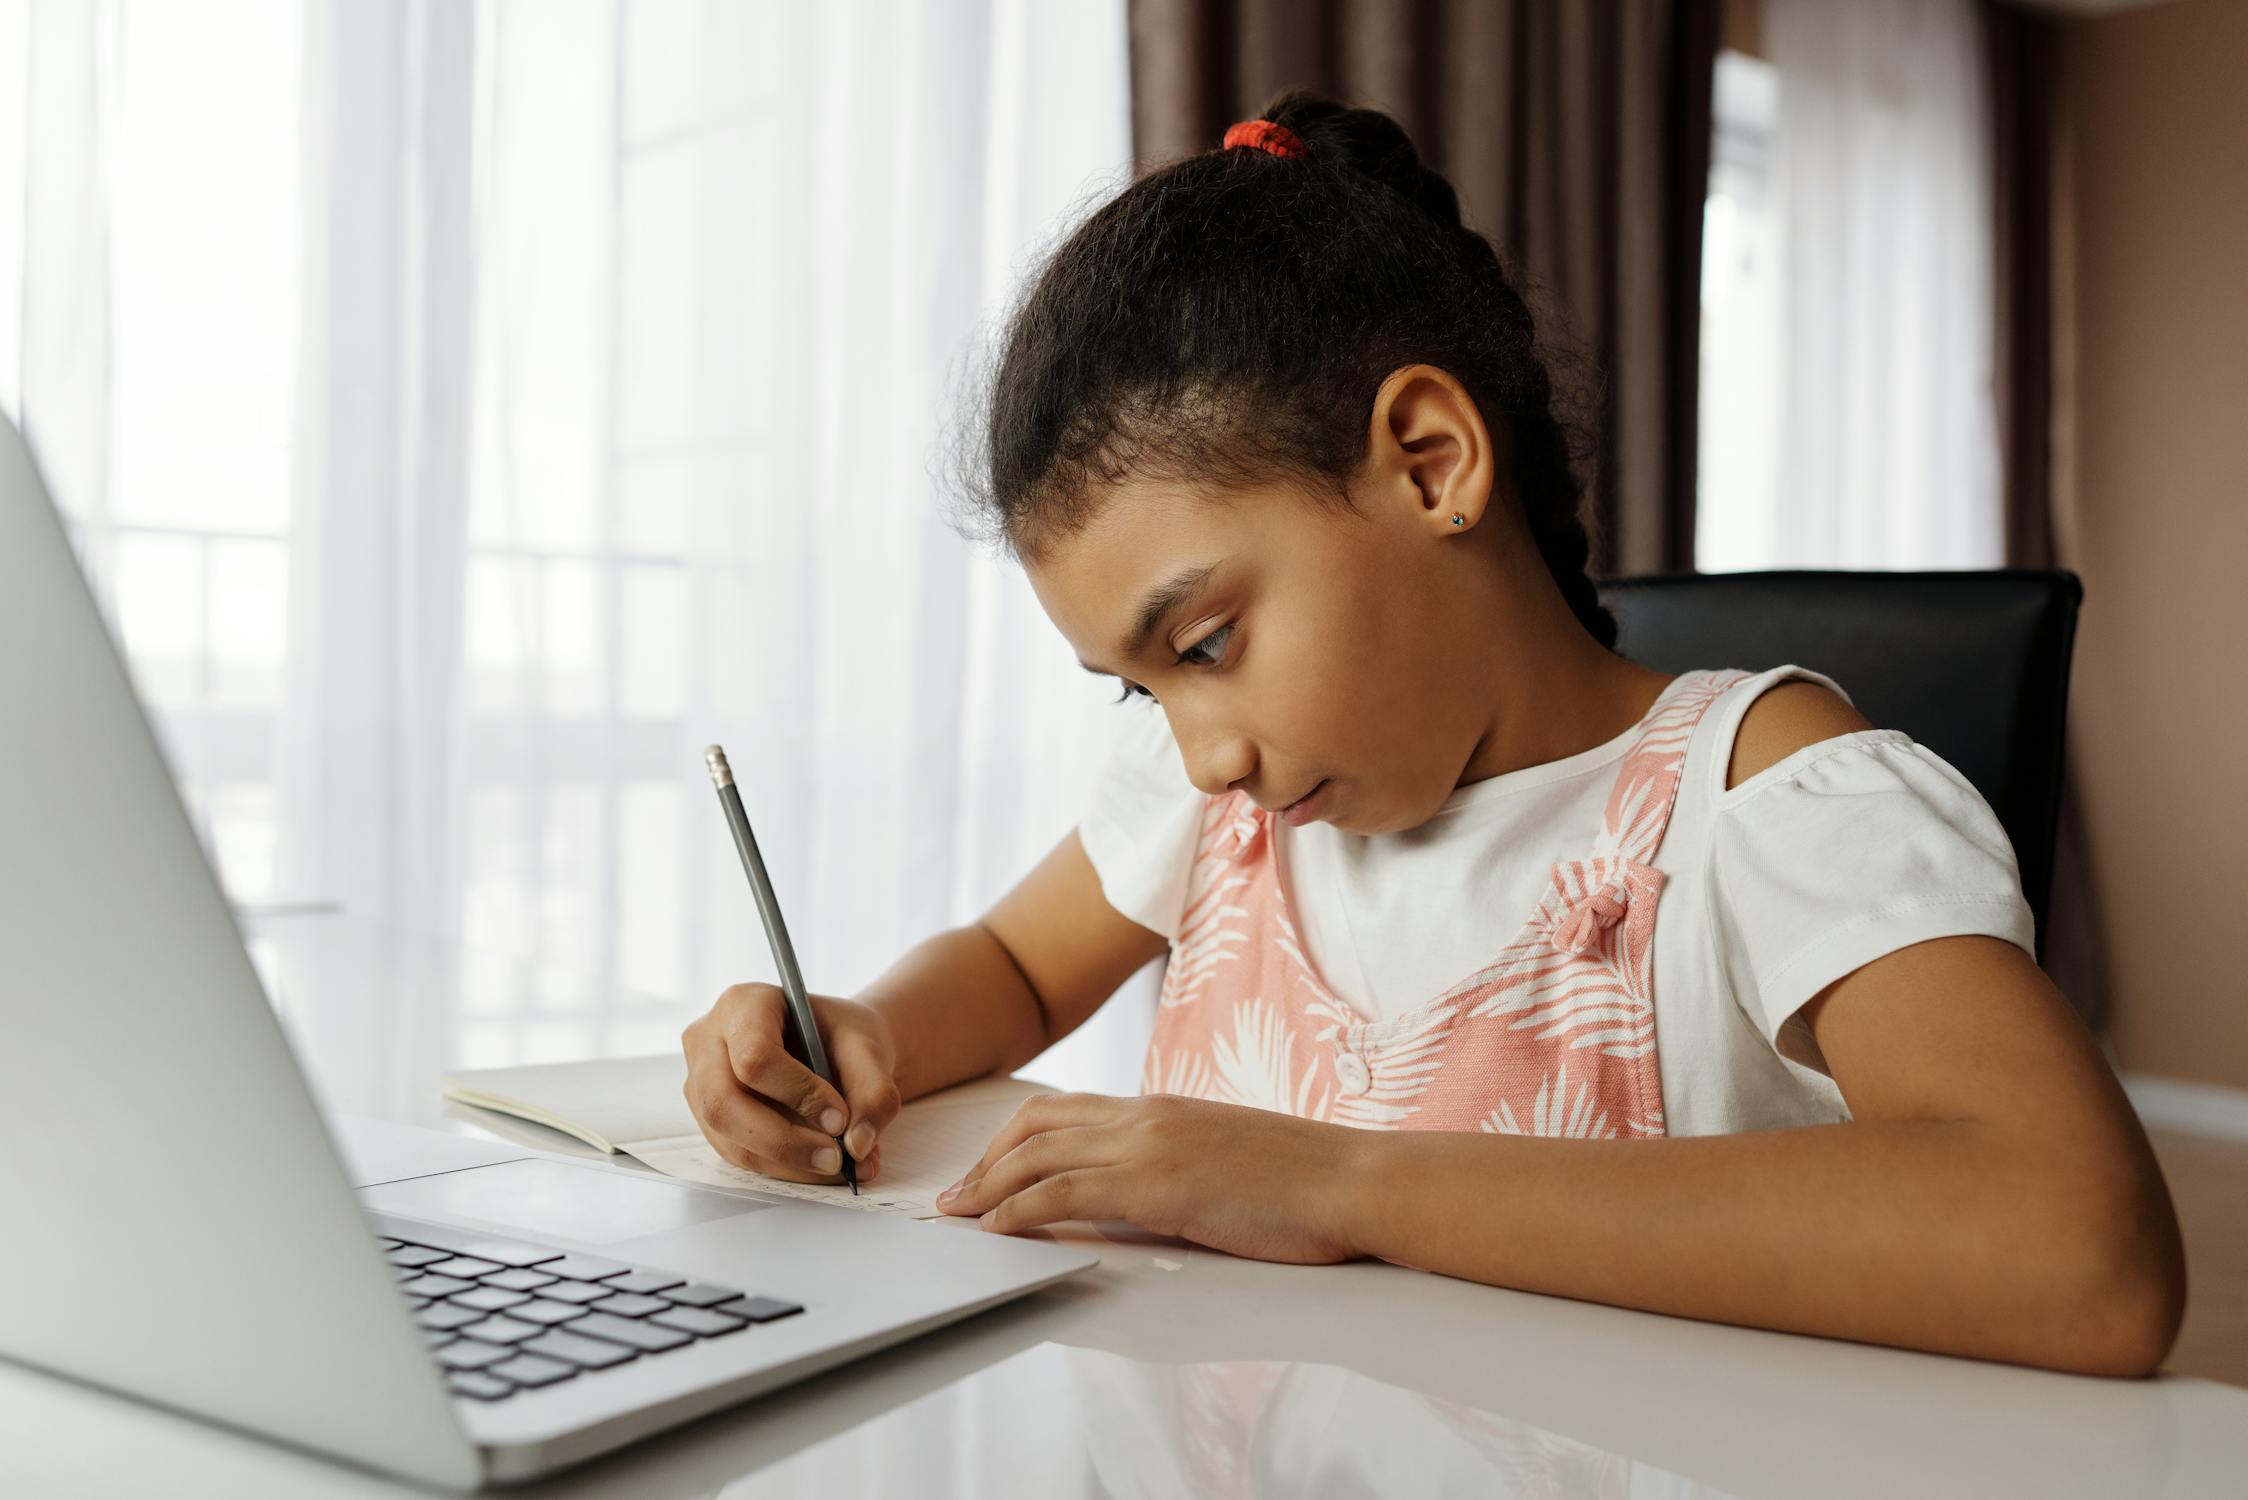 A young girl takes notes while taking part in remote learning